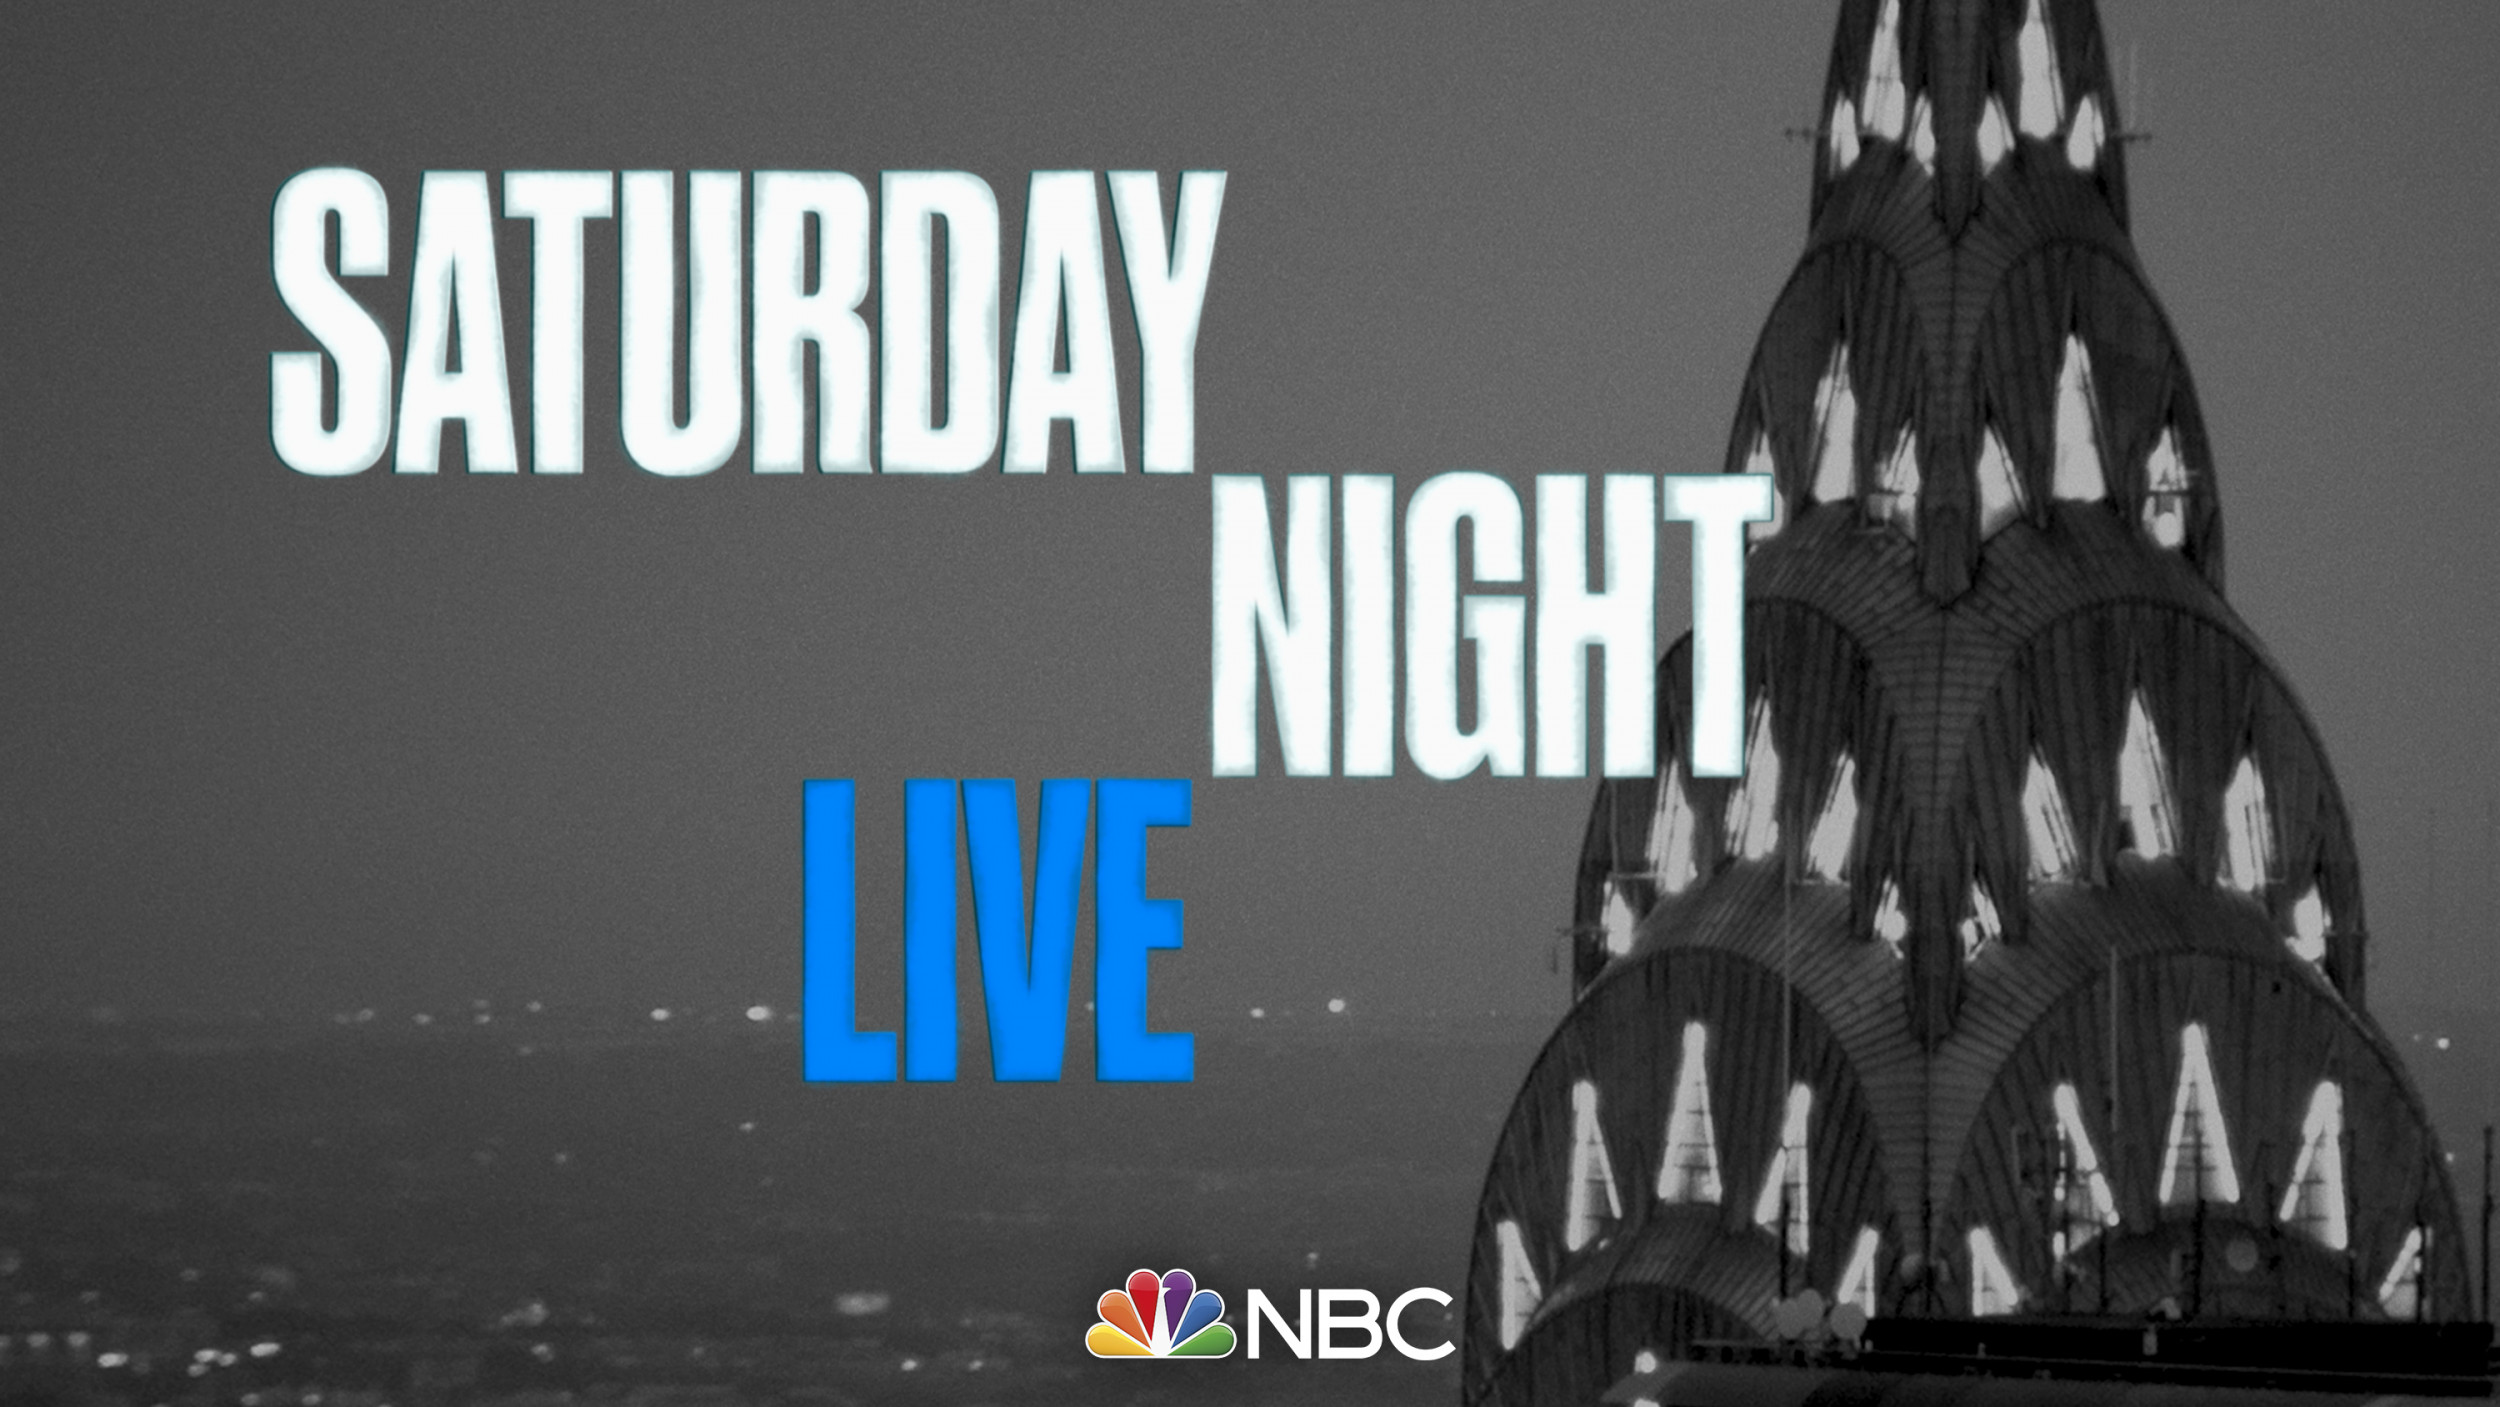 What's on 'SNL' Tonight? Find Out Who Will Host and Perform Next on